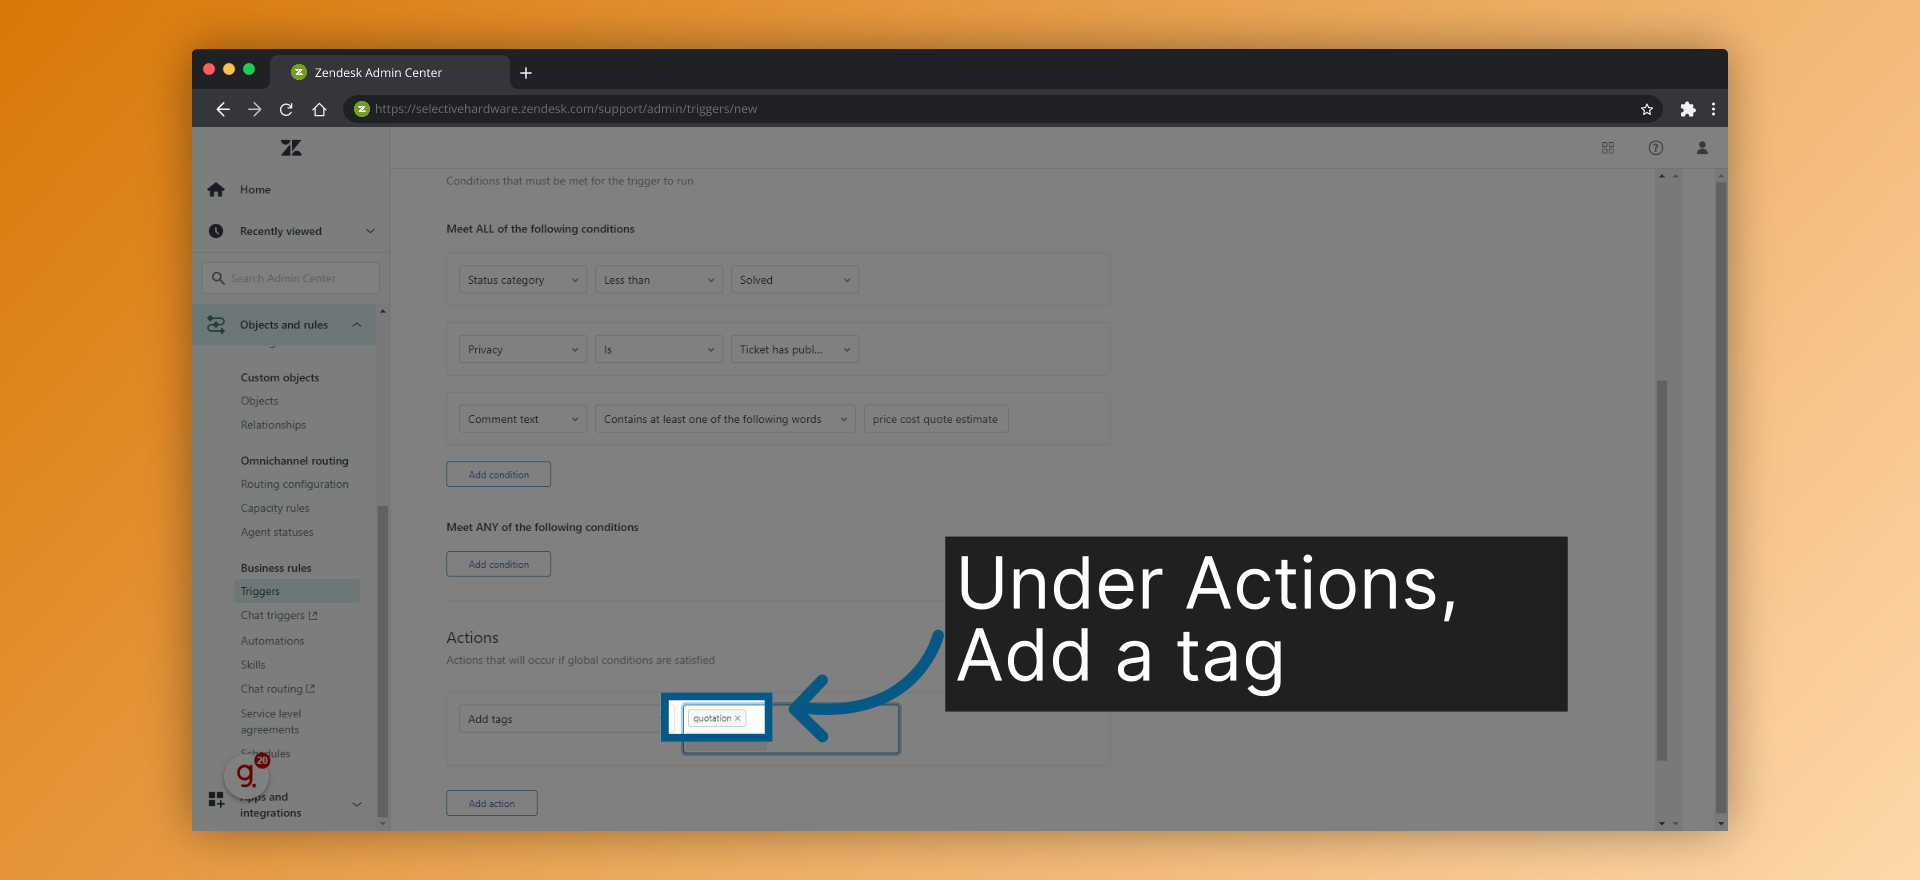 Under Actions, Add a tag